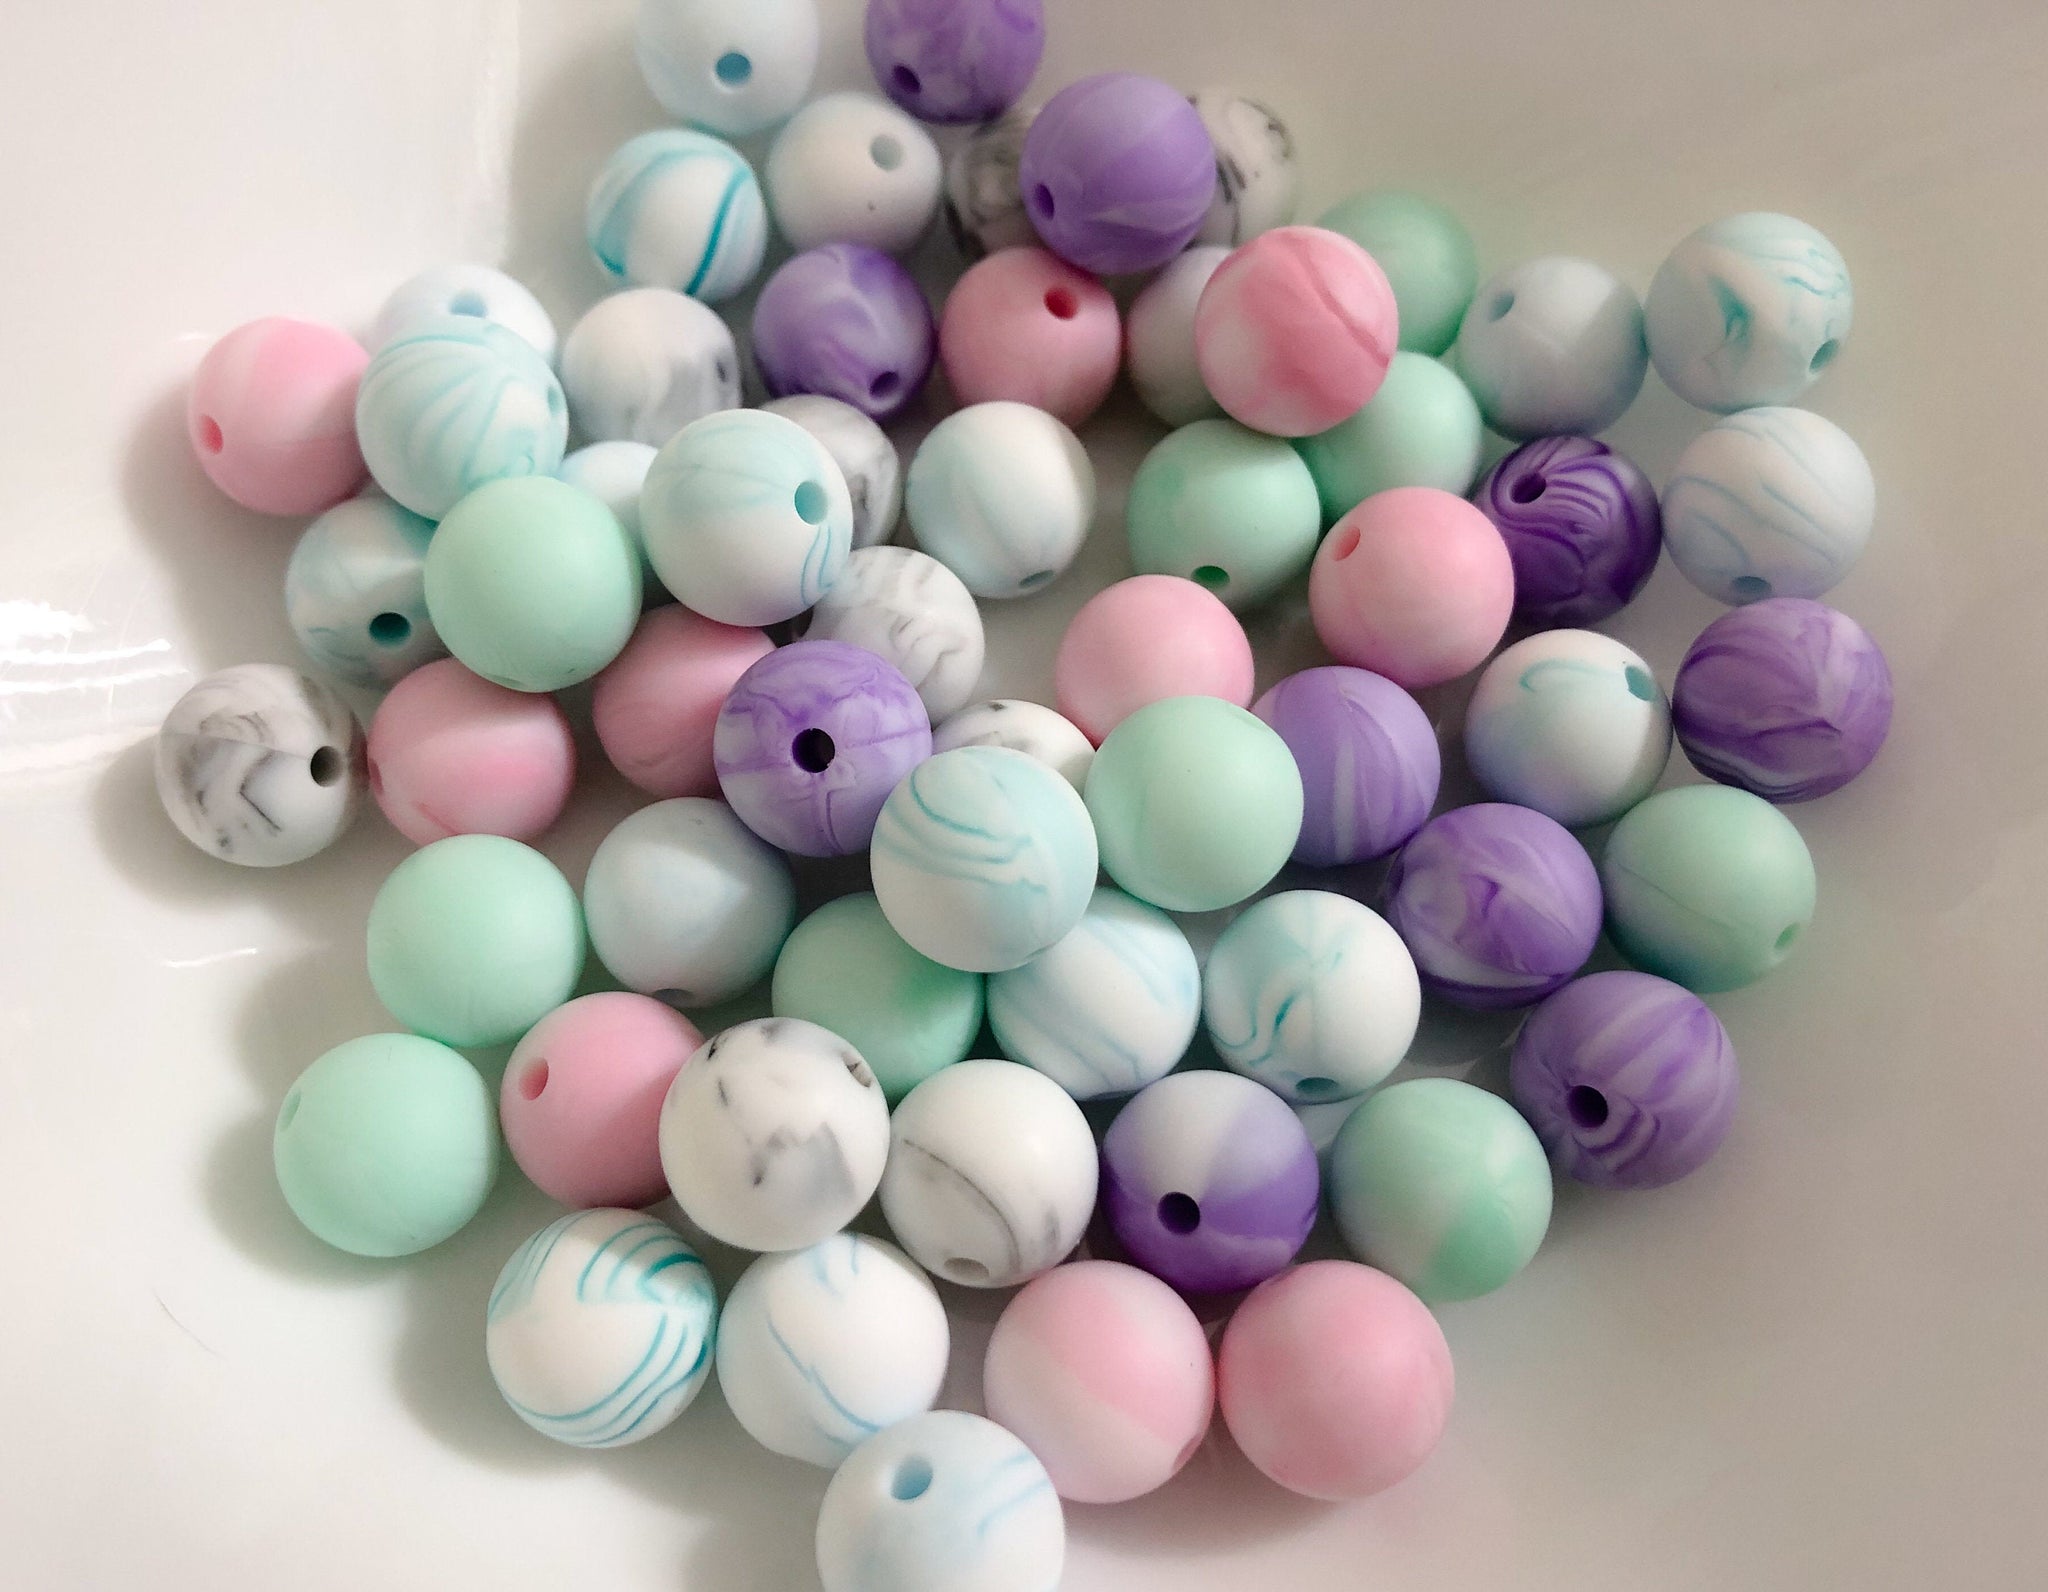 60 Bulk Silicone Beads - Marble Mix - Pink, Mint, Teal, Blue, Purple, –  Tesla Baby